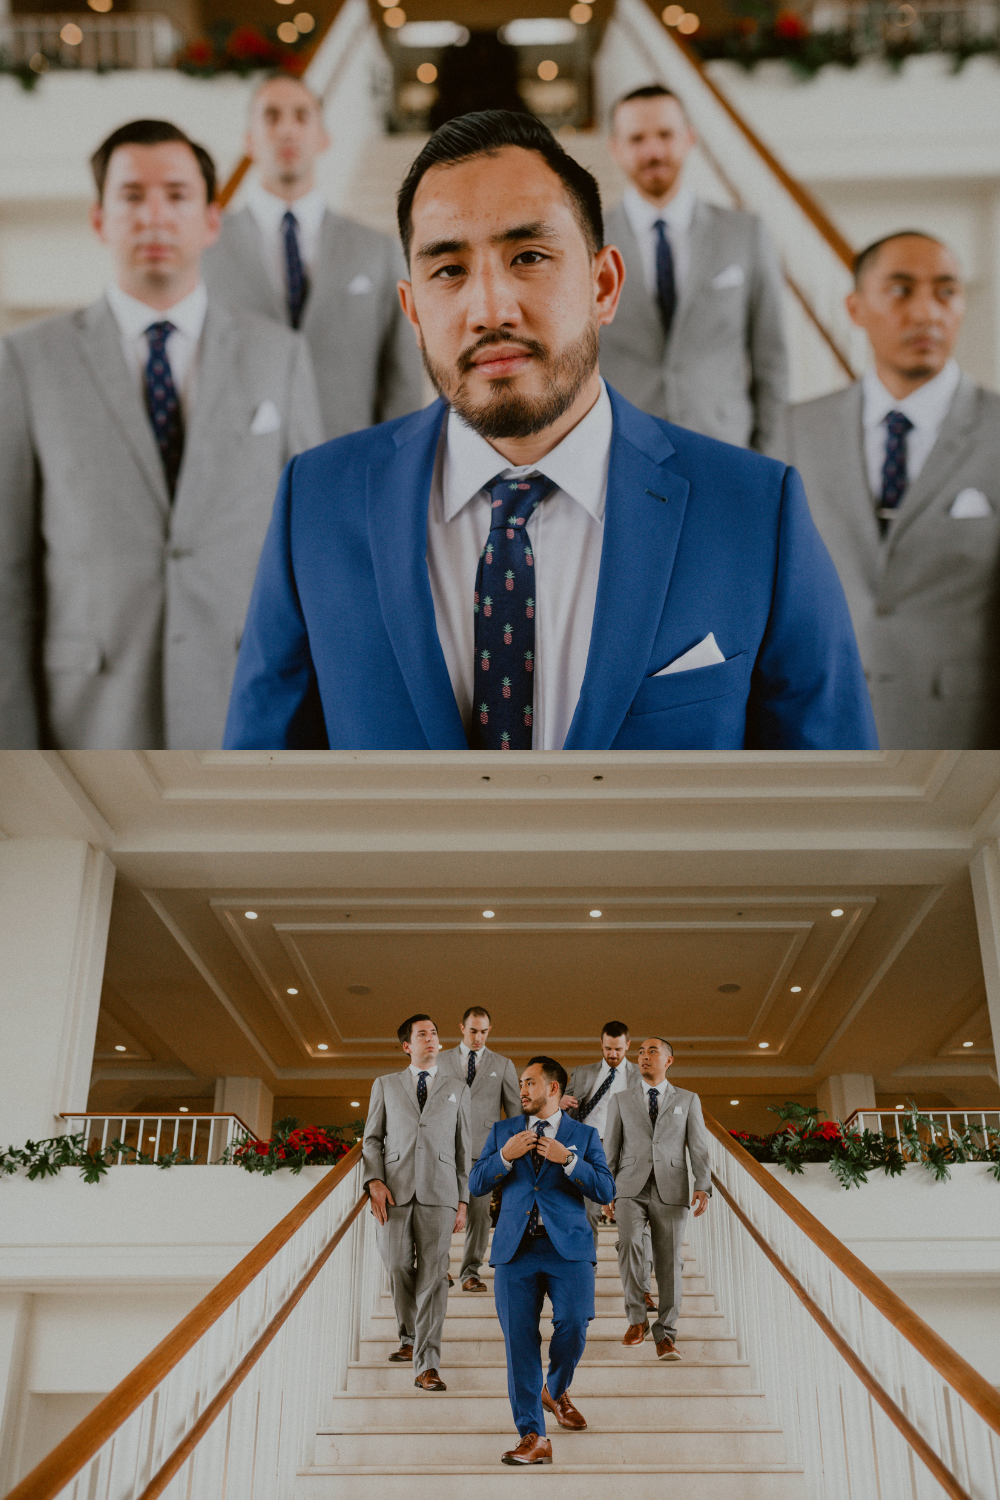 Groom in blue suit is surrounded by the wedding party standing and walking in the hotel lobby dressed in grey suits | Groom style tips, Groom wedding day inspiration, Groom Tips Wedding, Groom tips for men, Groom tips | chelseaabril.com